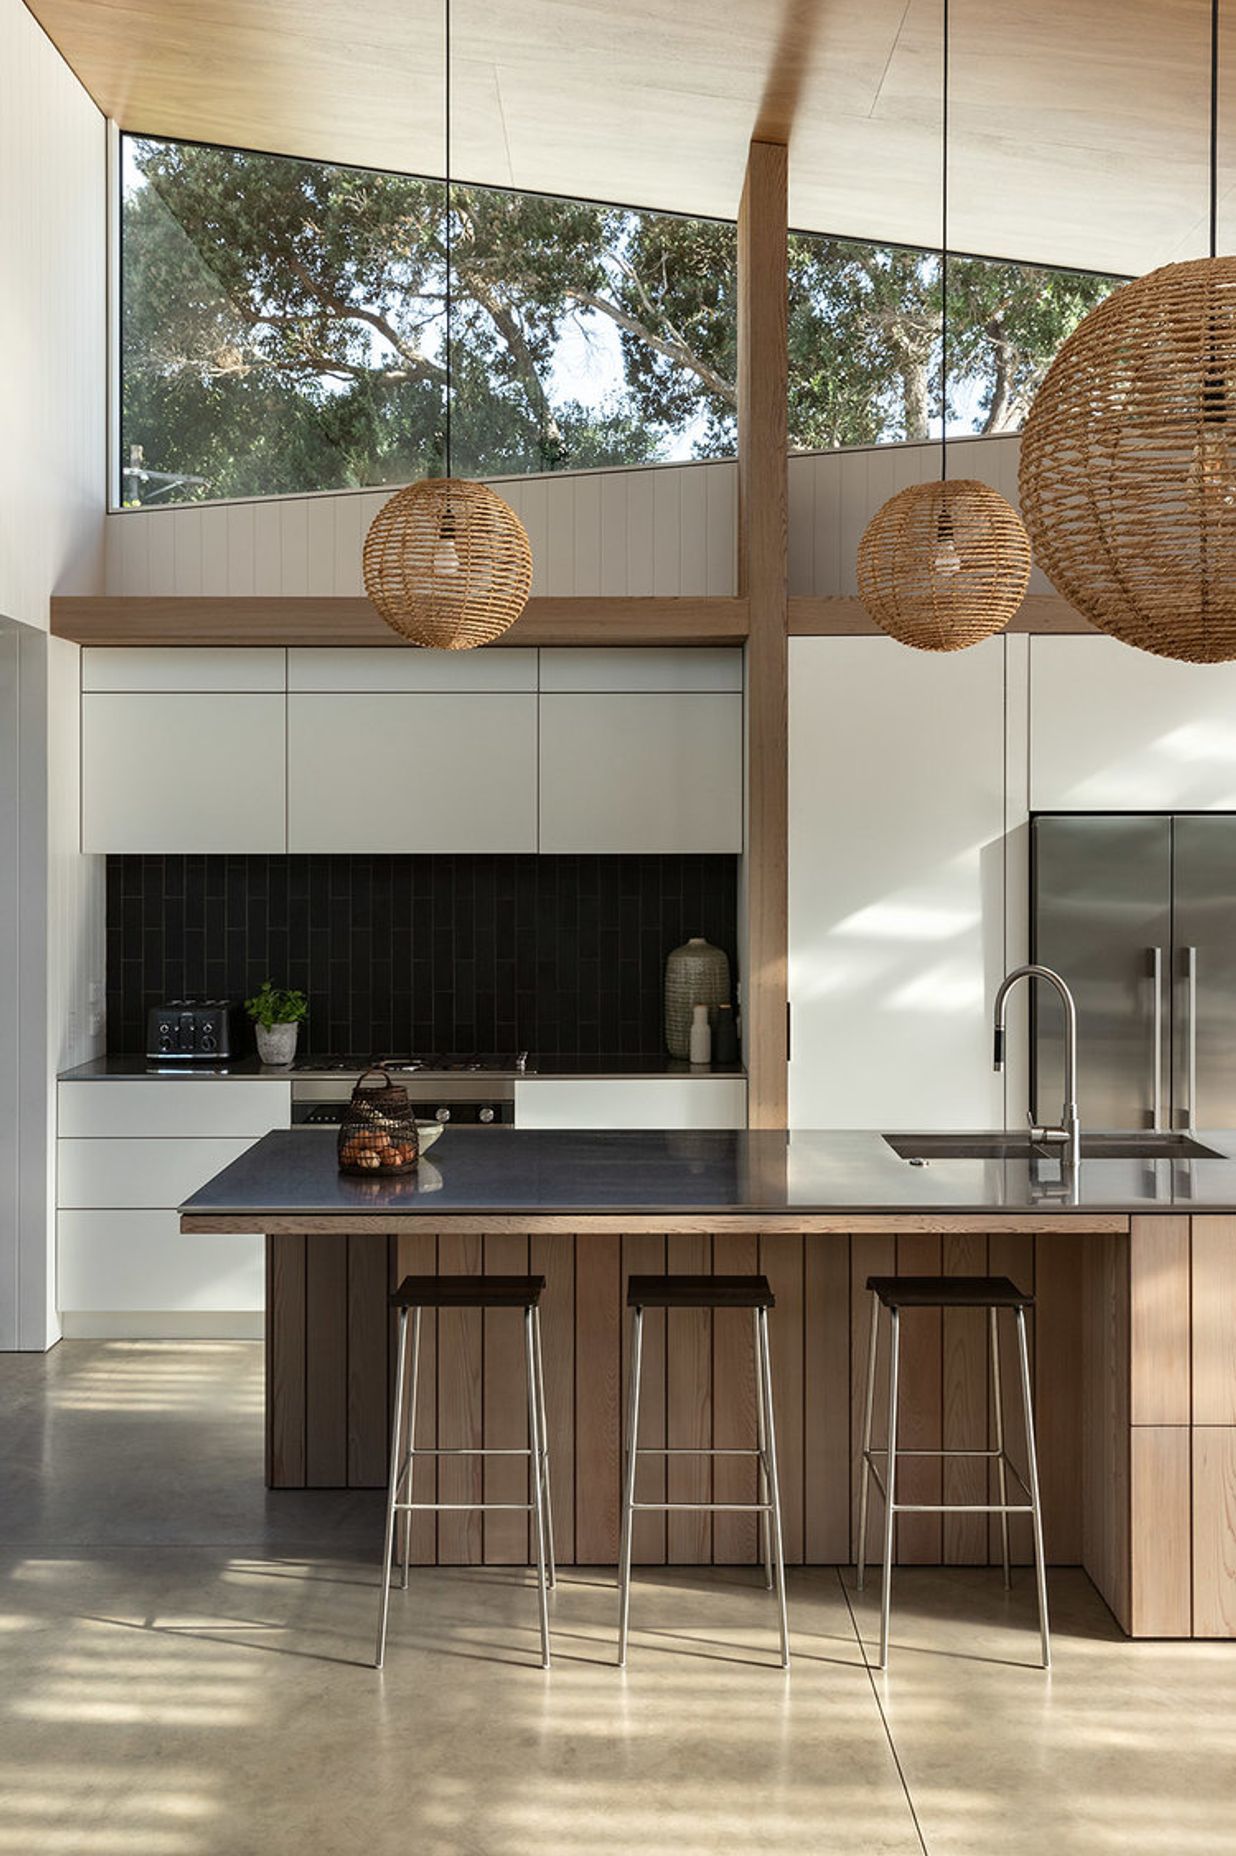 Timber elements add warmth to the monochromatic kitchen and concrete flooring.